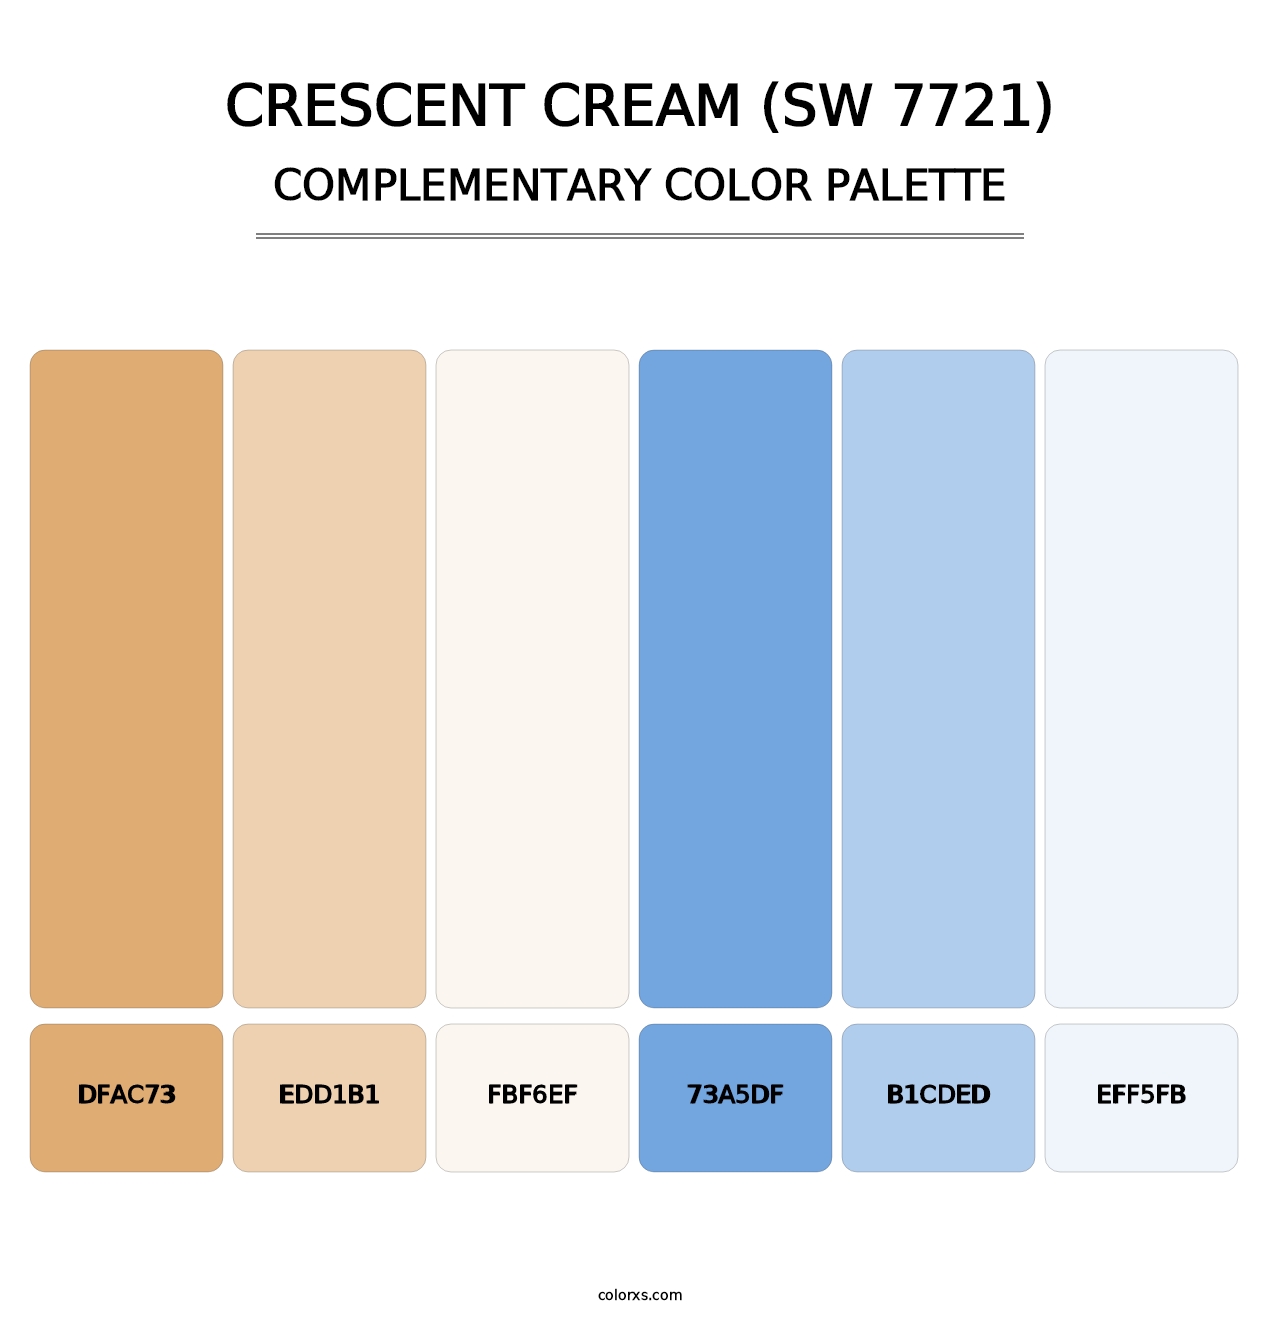 Crescent Cream (SW 7721) - Complementary Color Palette